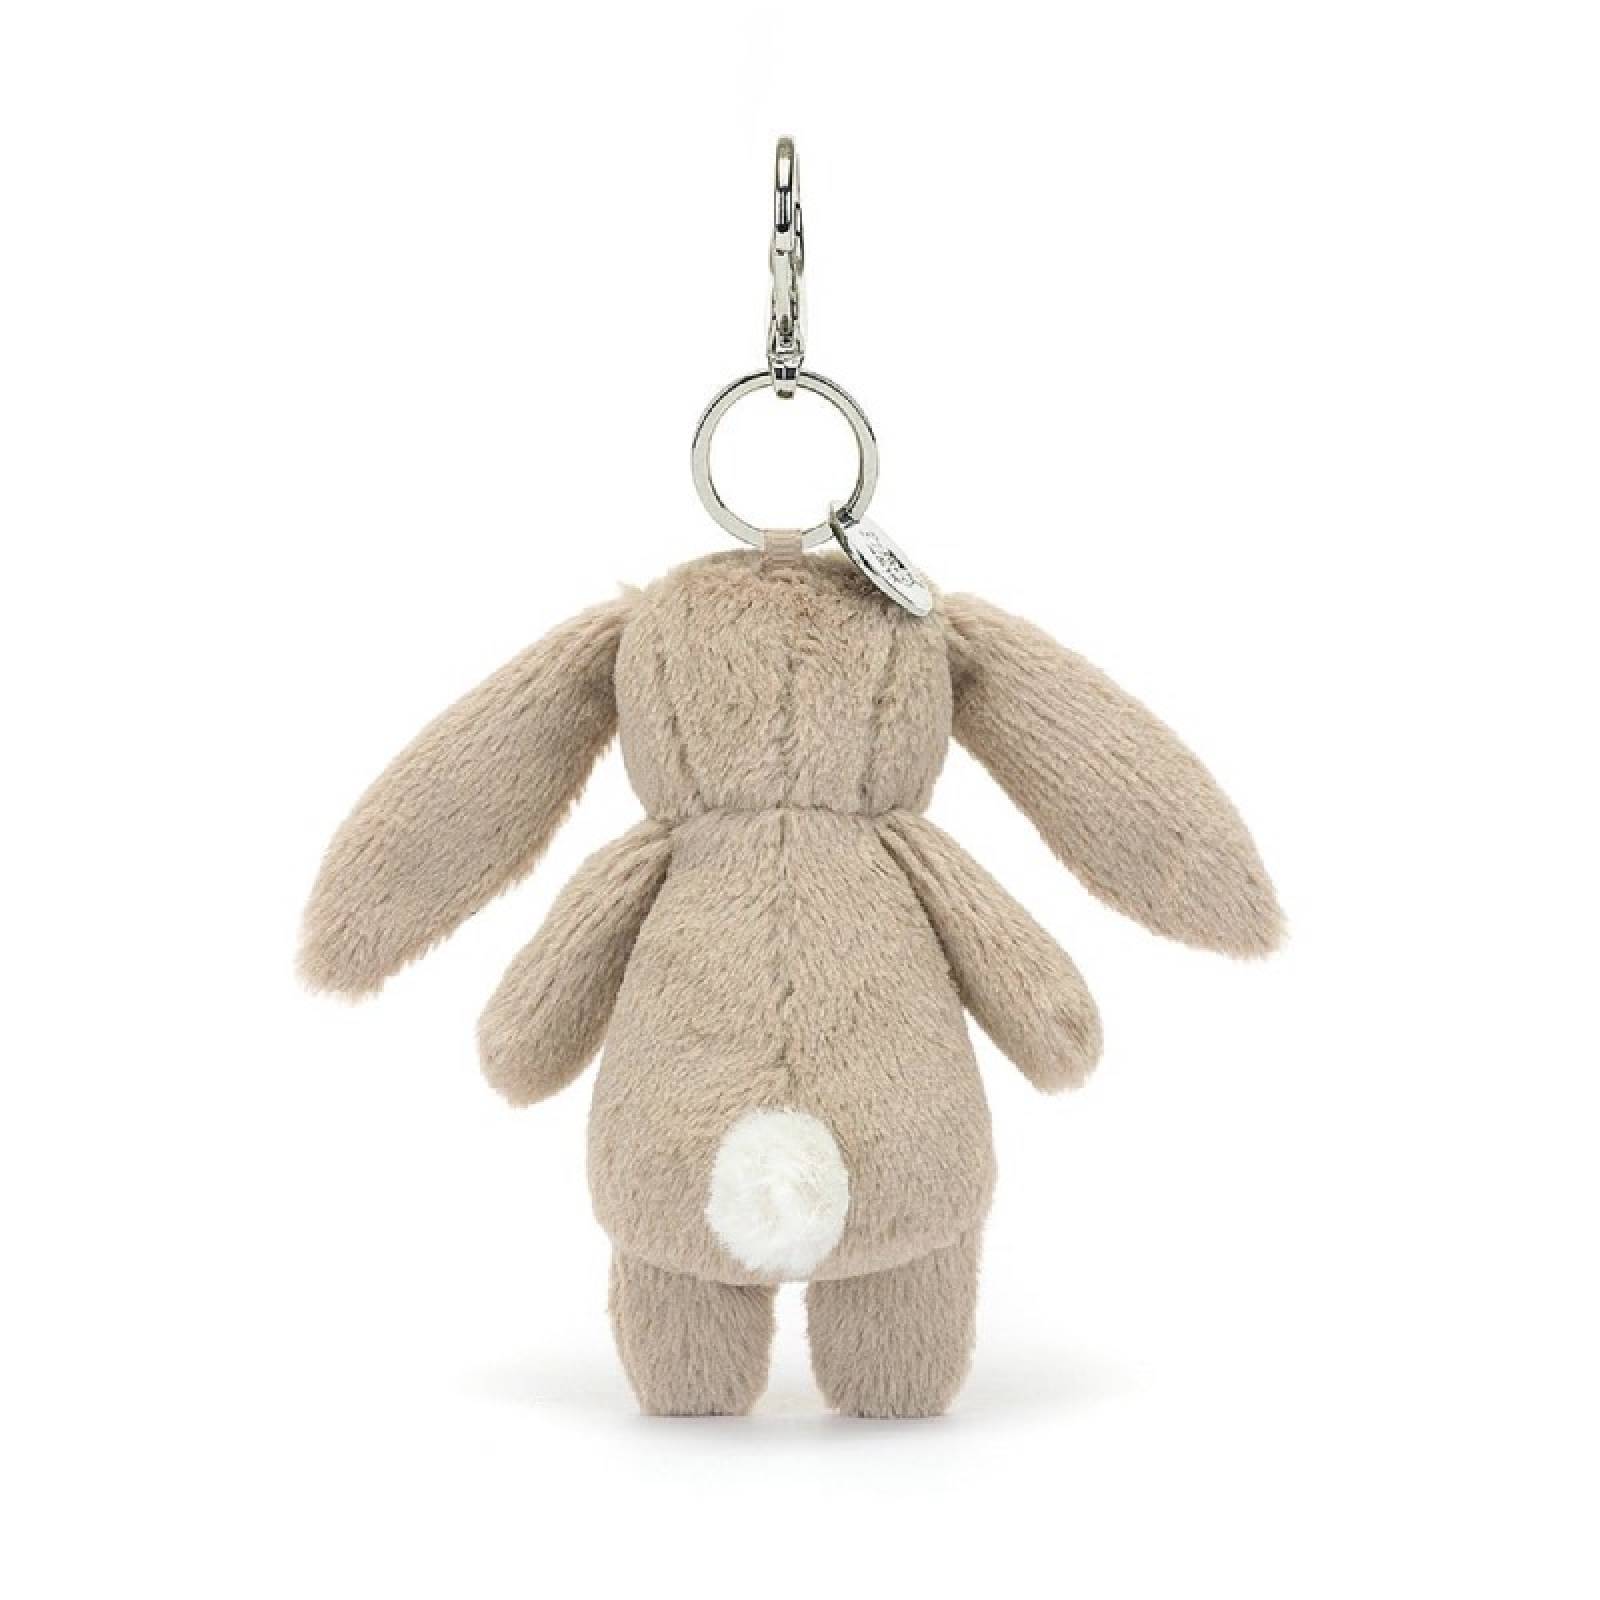 Blossom Beige Bunny Bag Charm By Jellycat 3+ thumbnails